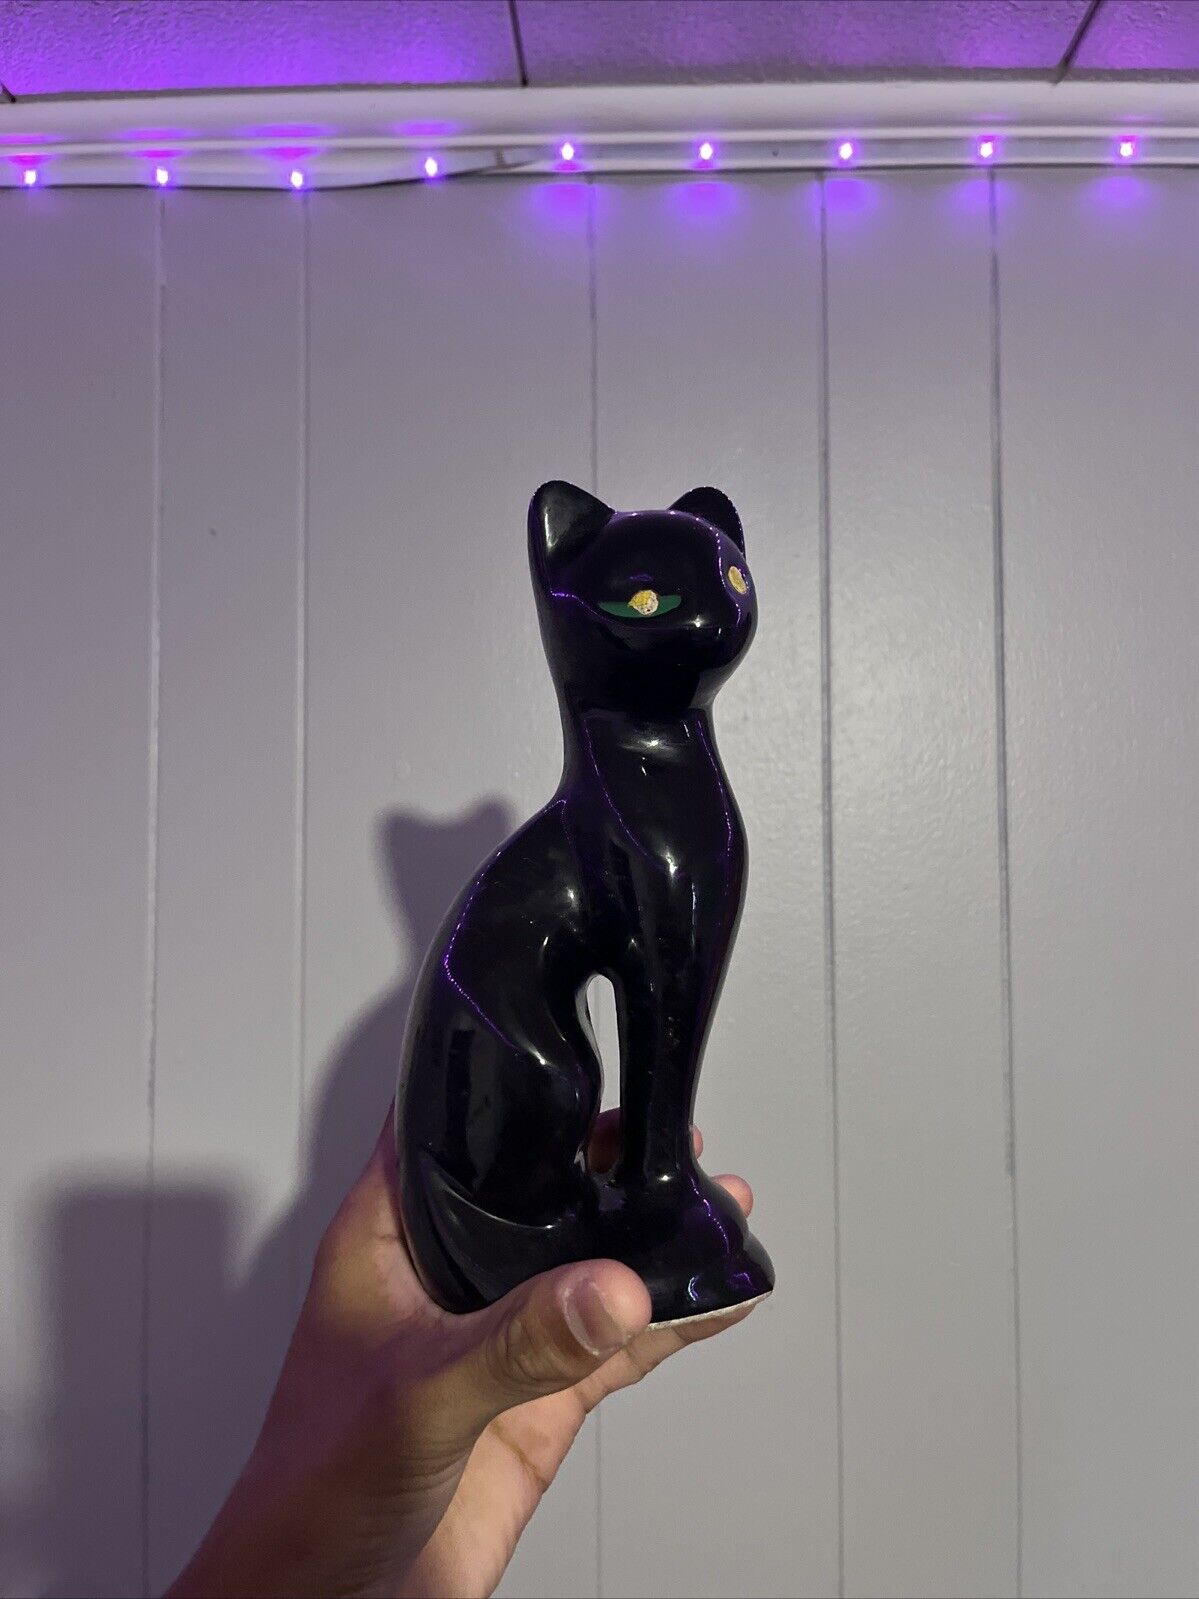 Vintage Black Cat With Green Eyes Porcelain Ceramic Statue Figurine 8” Tall